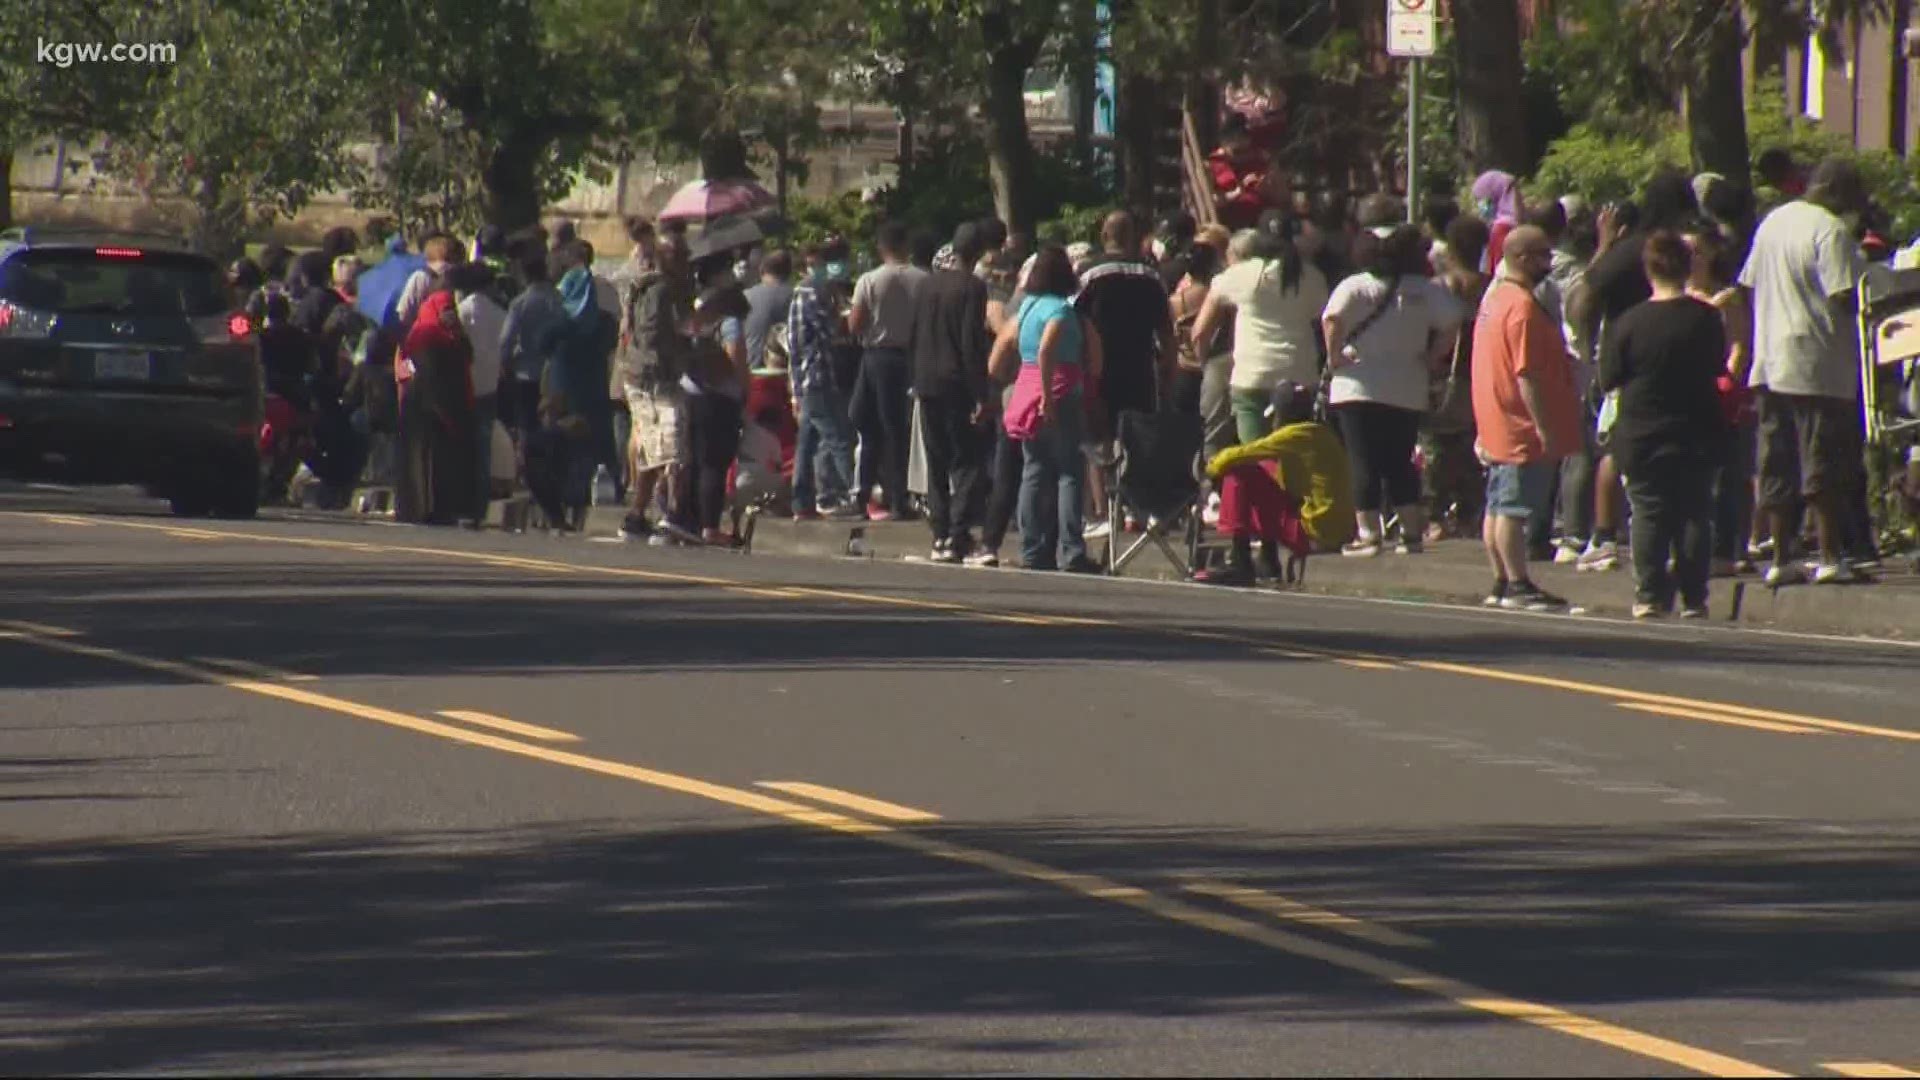 For the second straight day lines were long outside financial institutions across Oregon. People were looking to get their hands on $500 emergency relief checks.